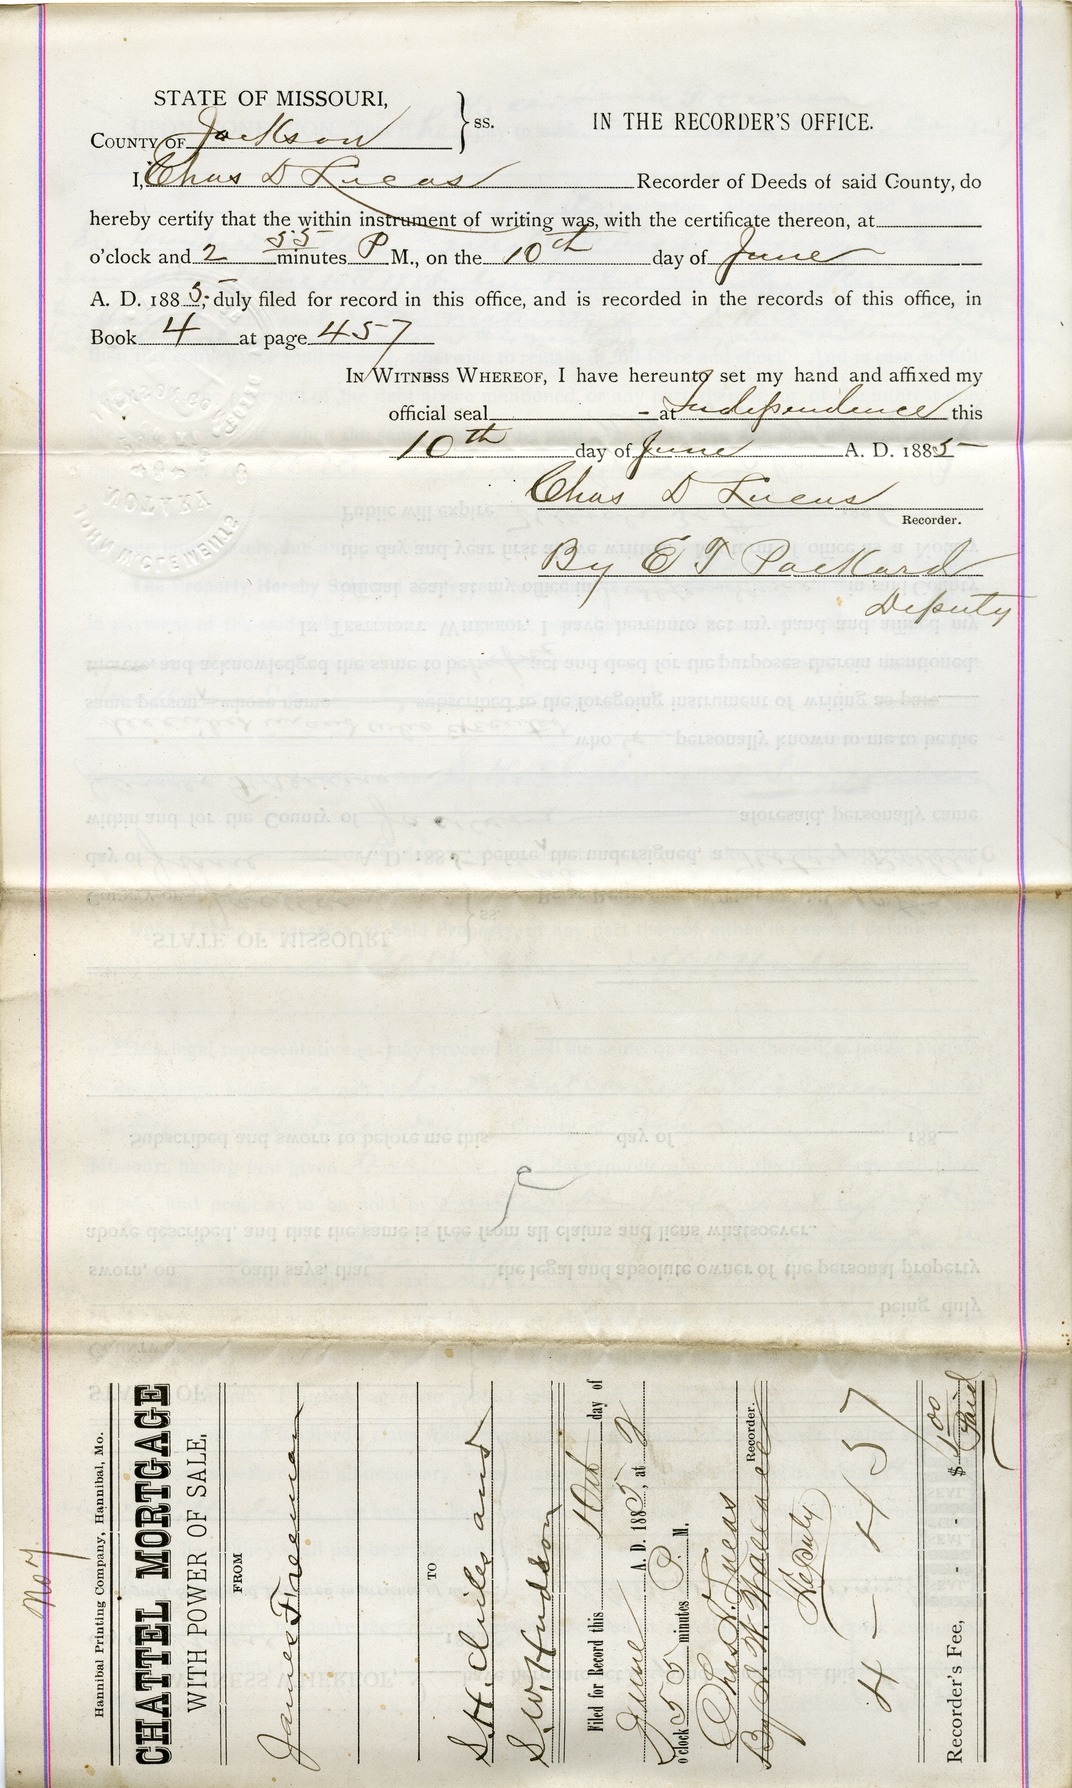 Chattel Mortgage from James Freeman to S. H. Chiles and S. W. Hudson